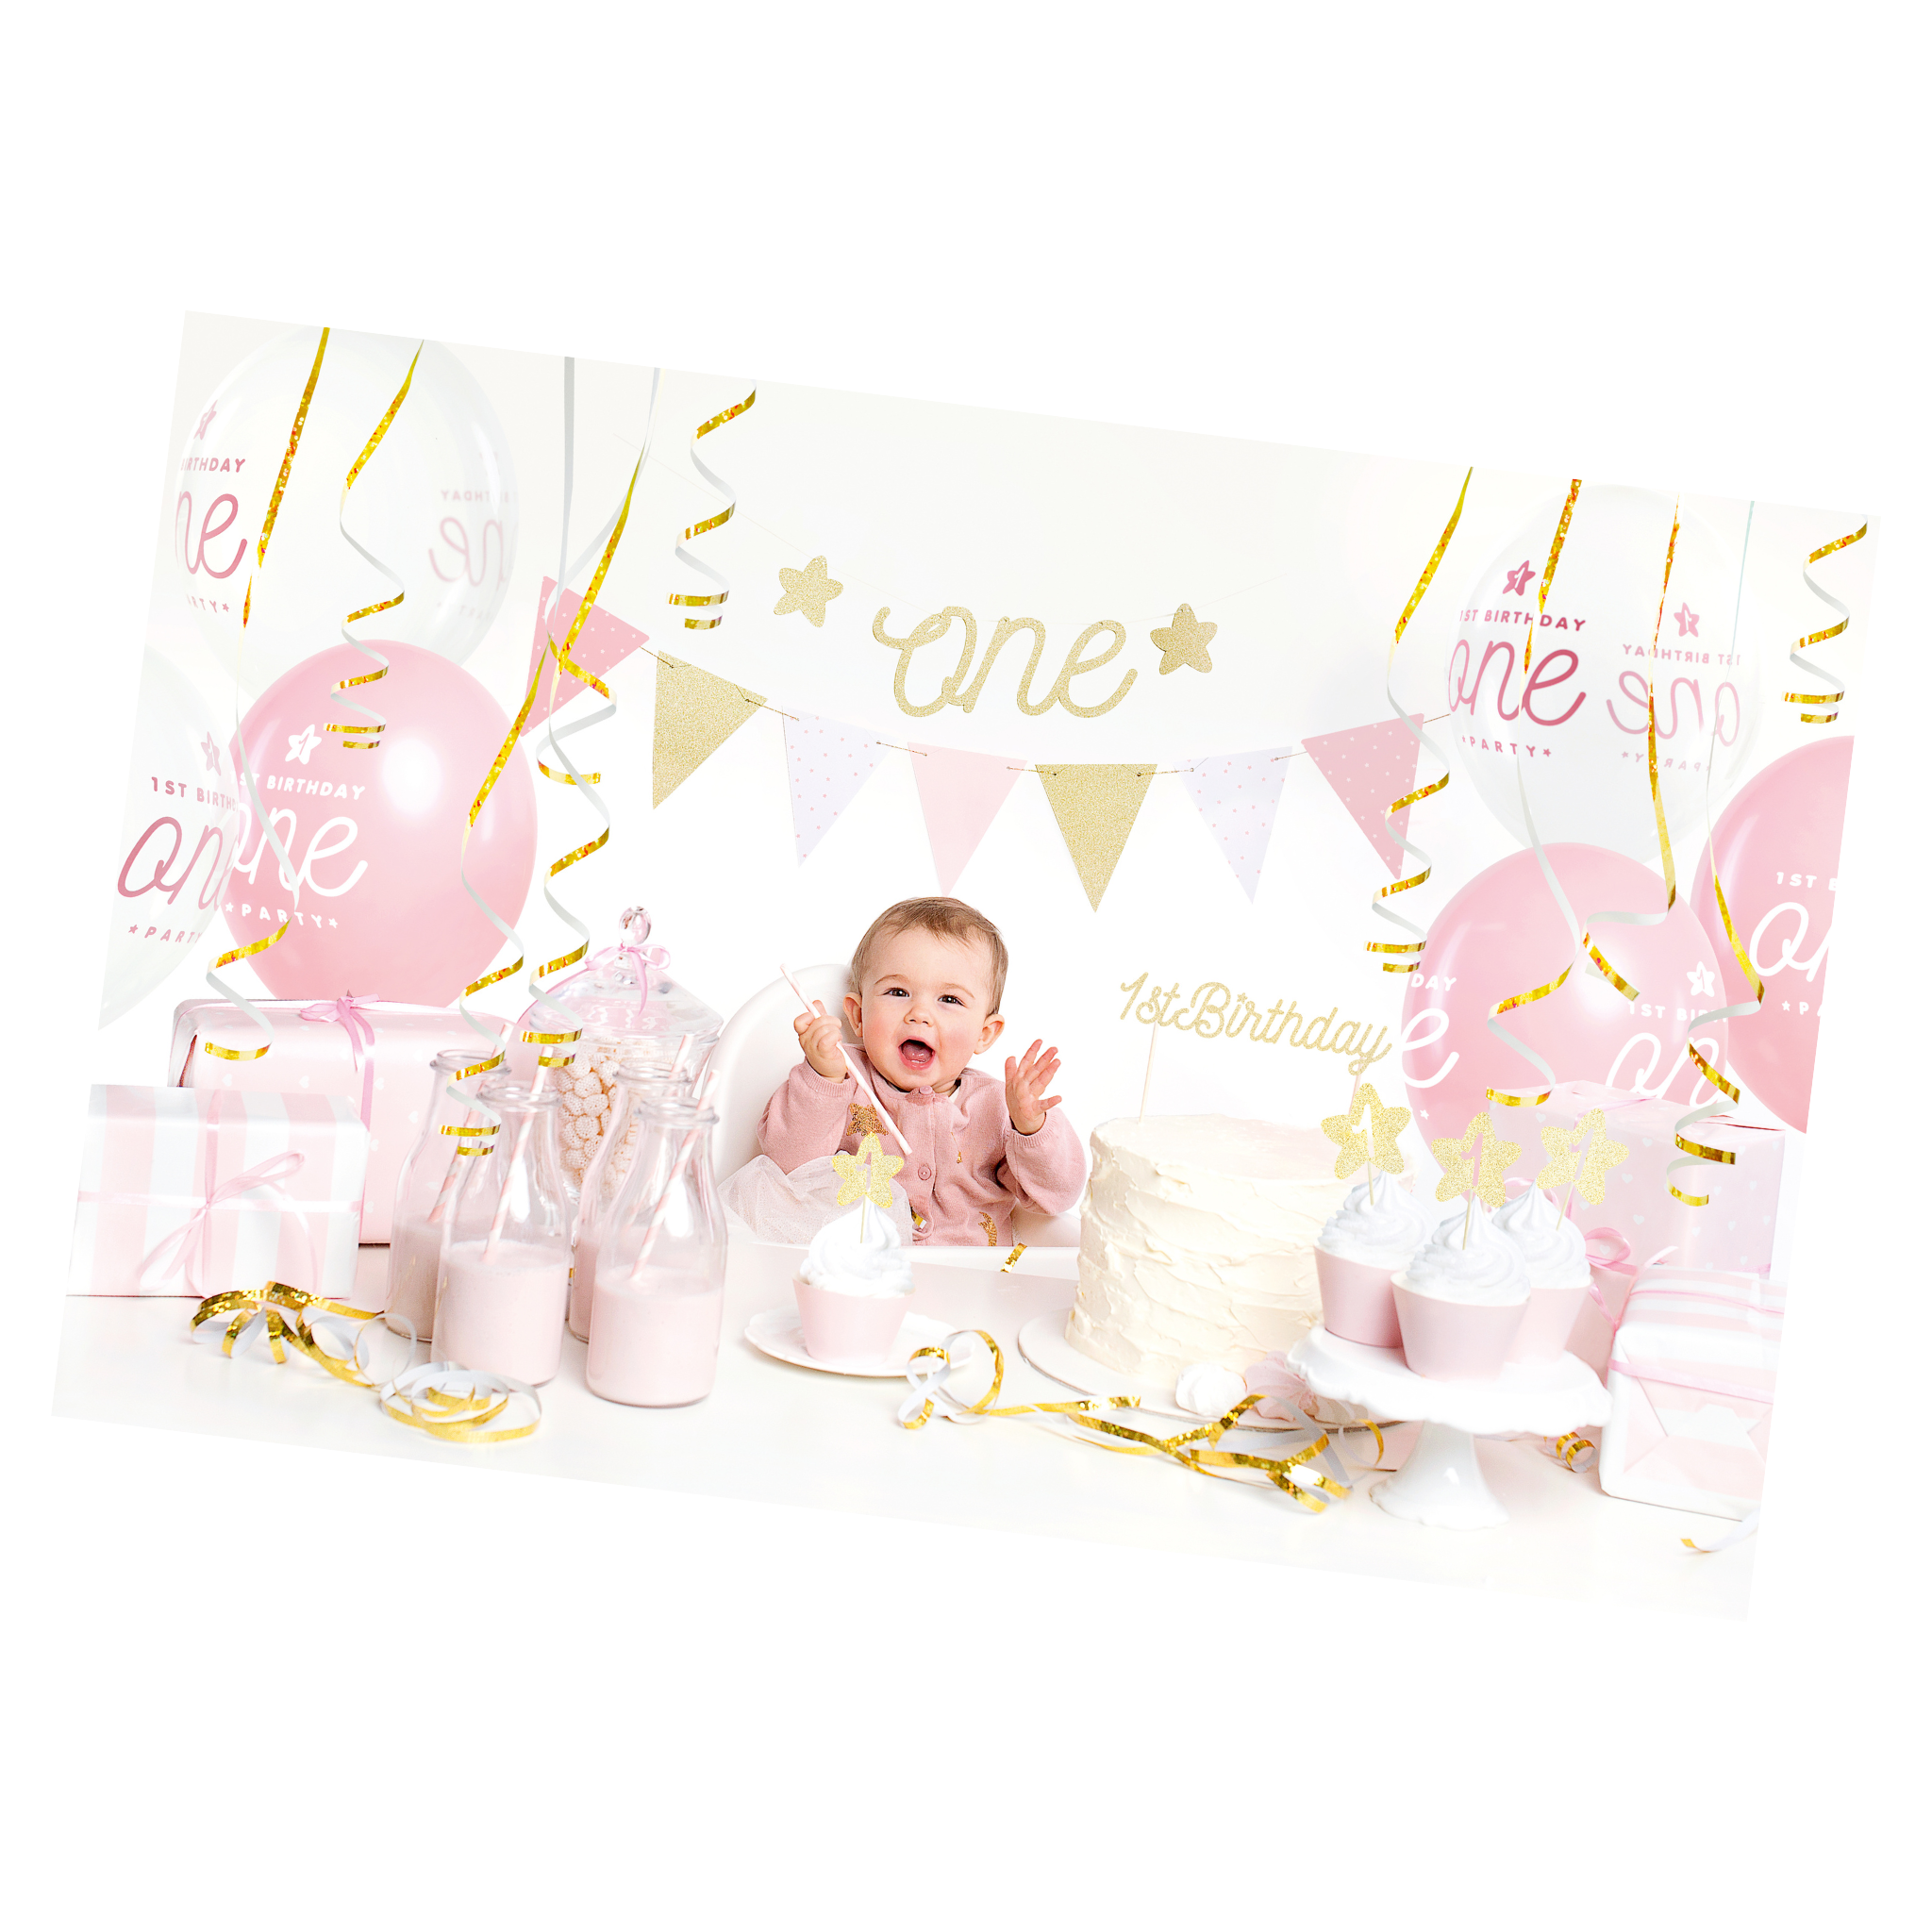 1st Birthday Decorations Set - Pink and Gold Theme